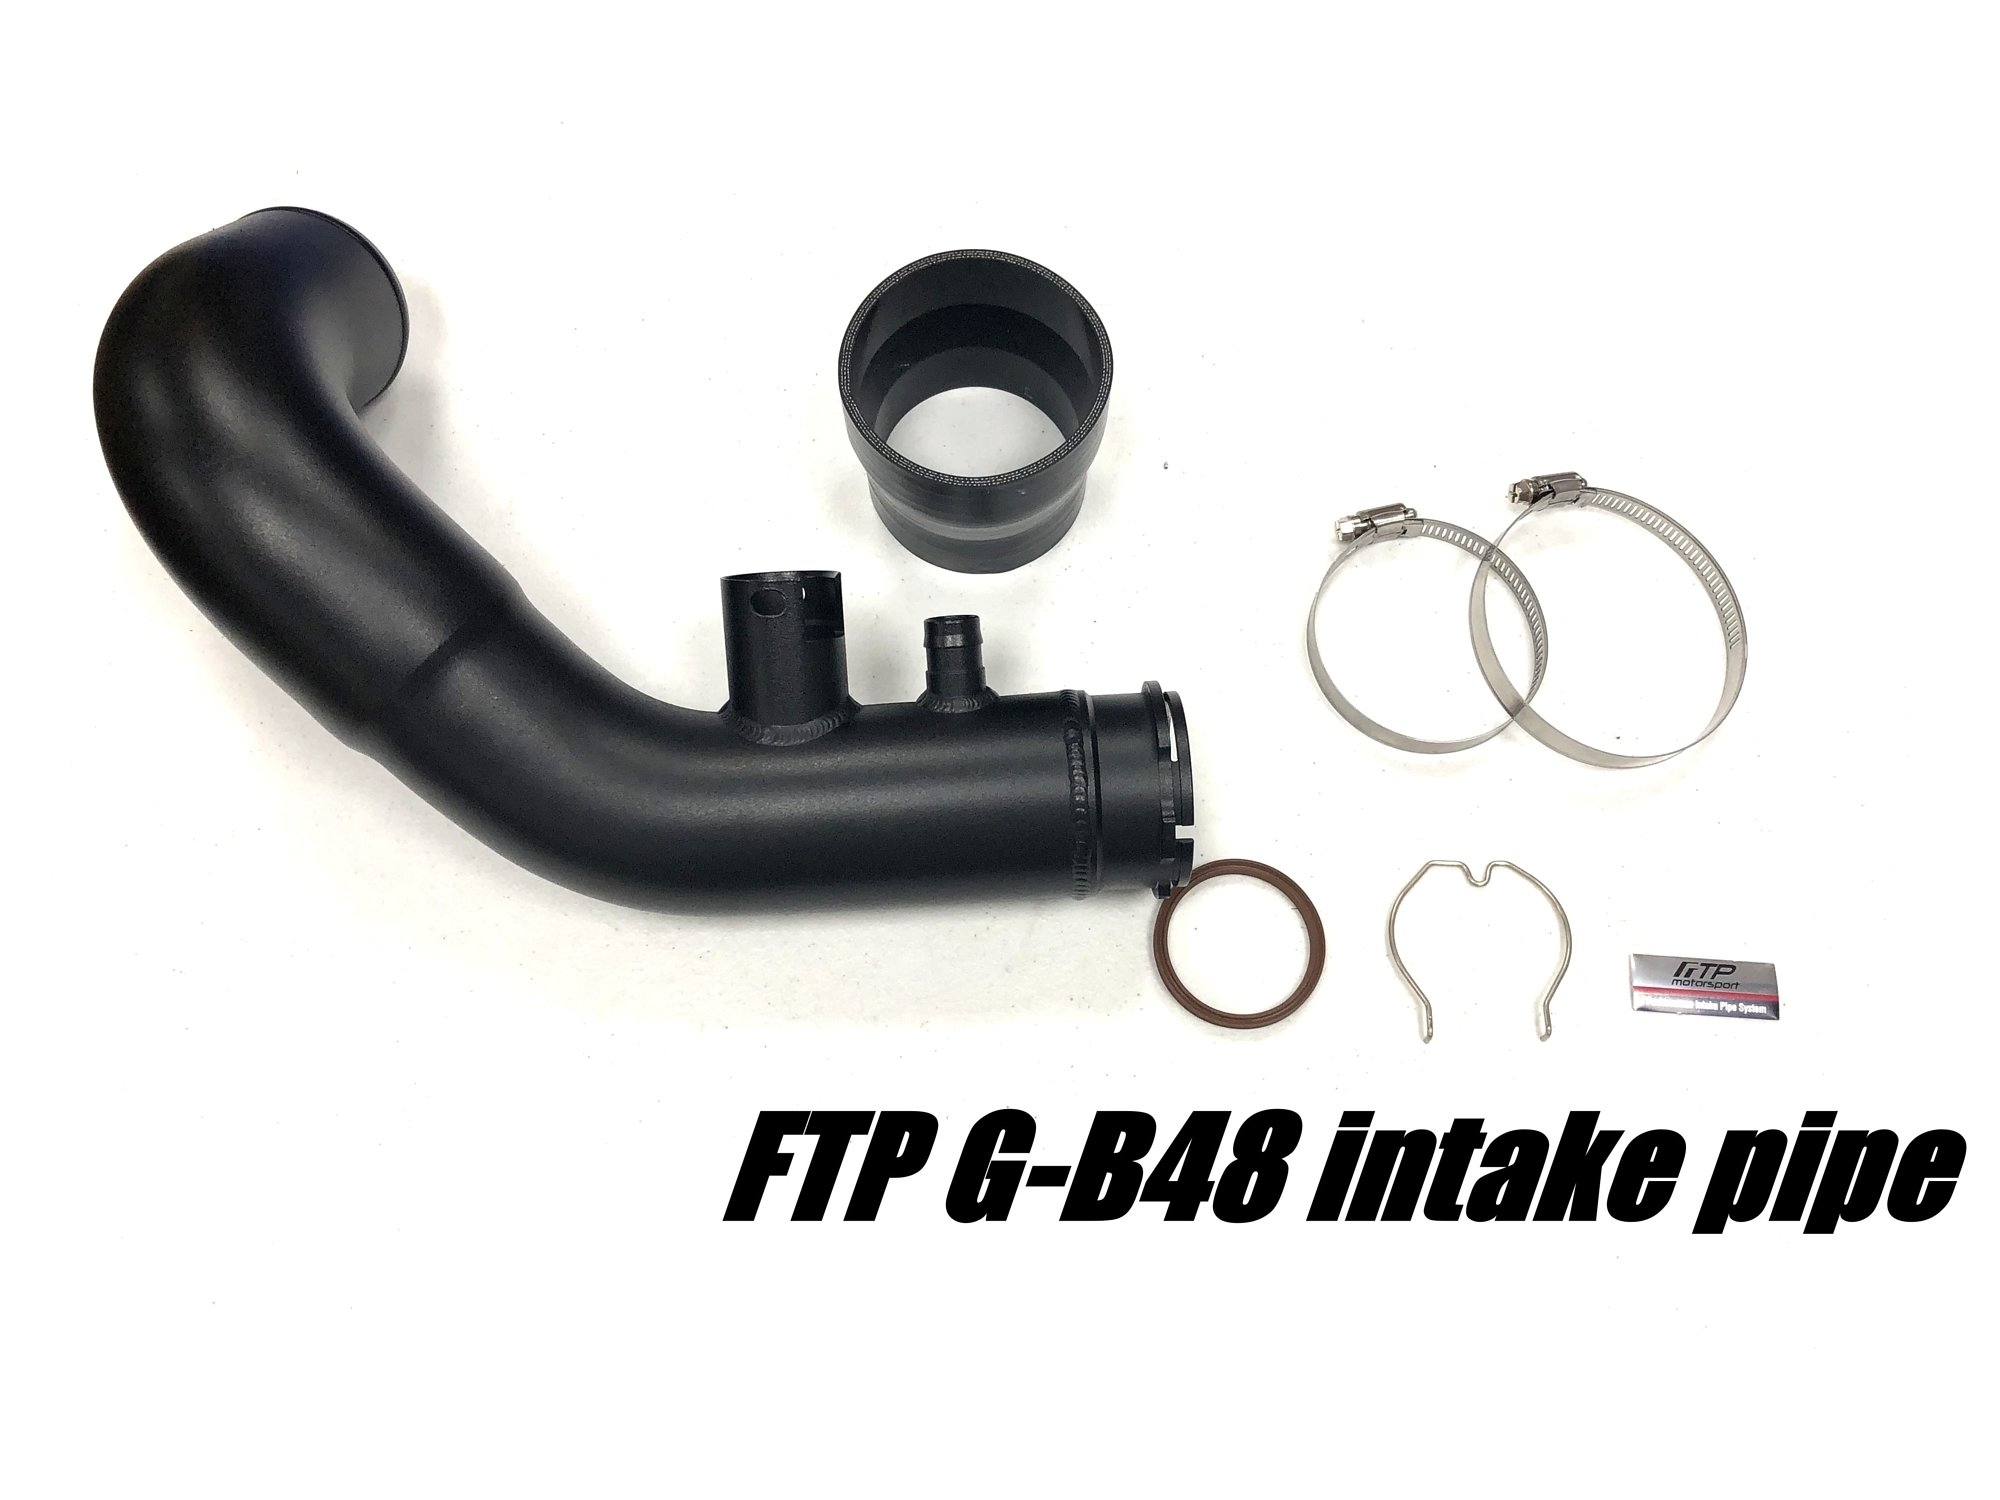 FTP Motorsport G20 B48 oil catch tank (Engine cover needs to be modified)